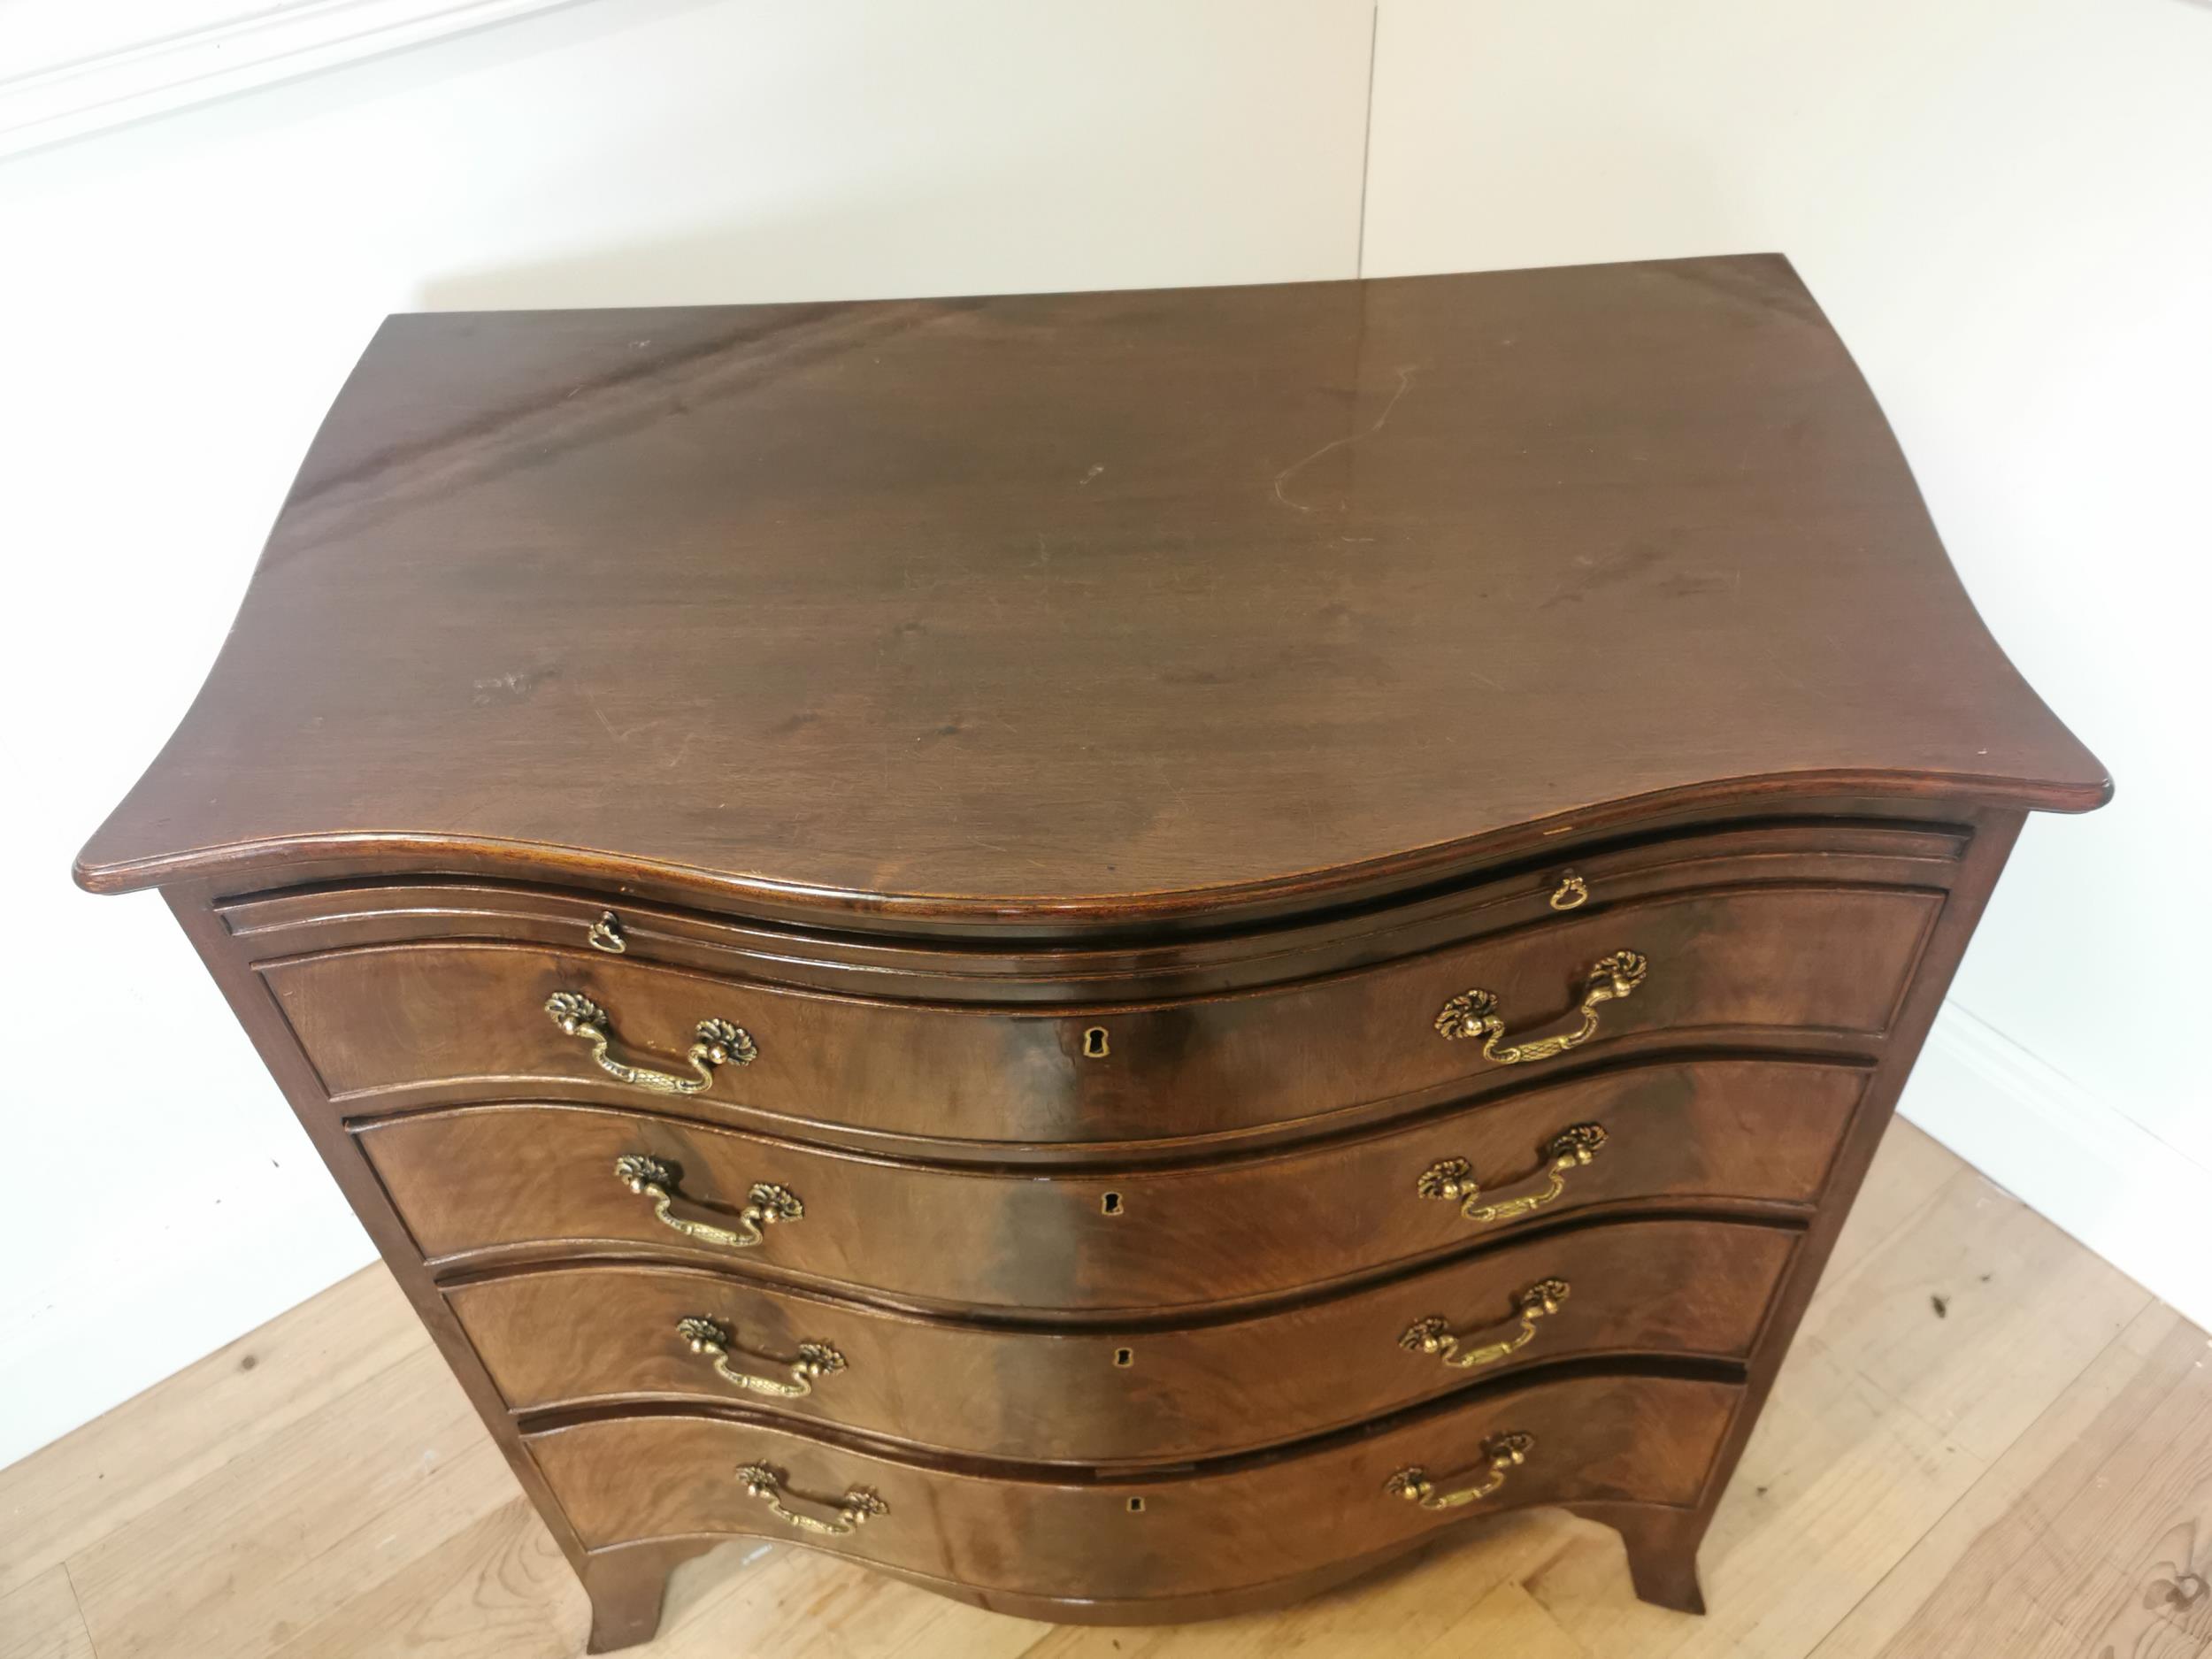 Good quality Edwardian serpentine fronted chest of drawers with four graduated drawers with brushing - Image 6 of 6